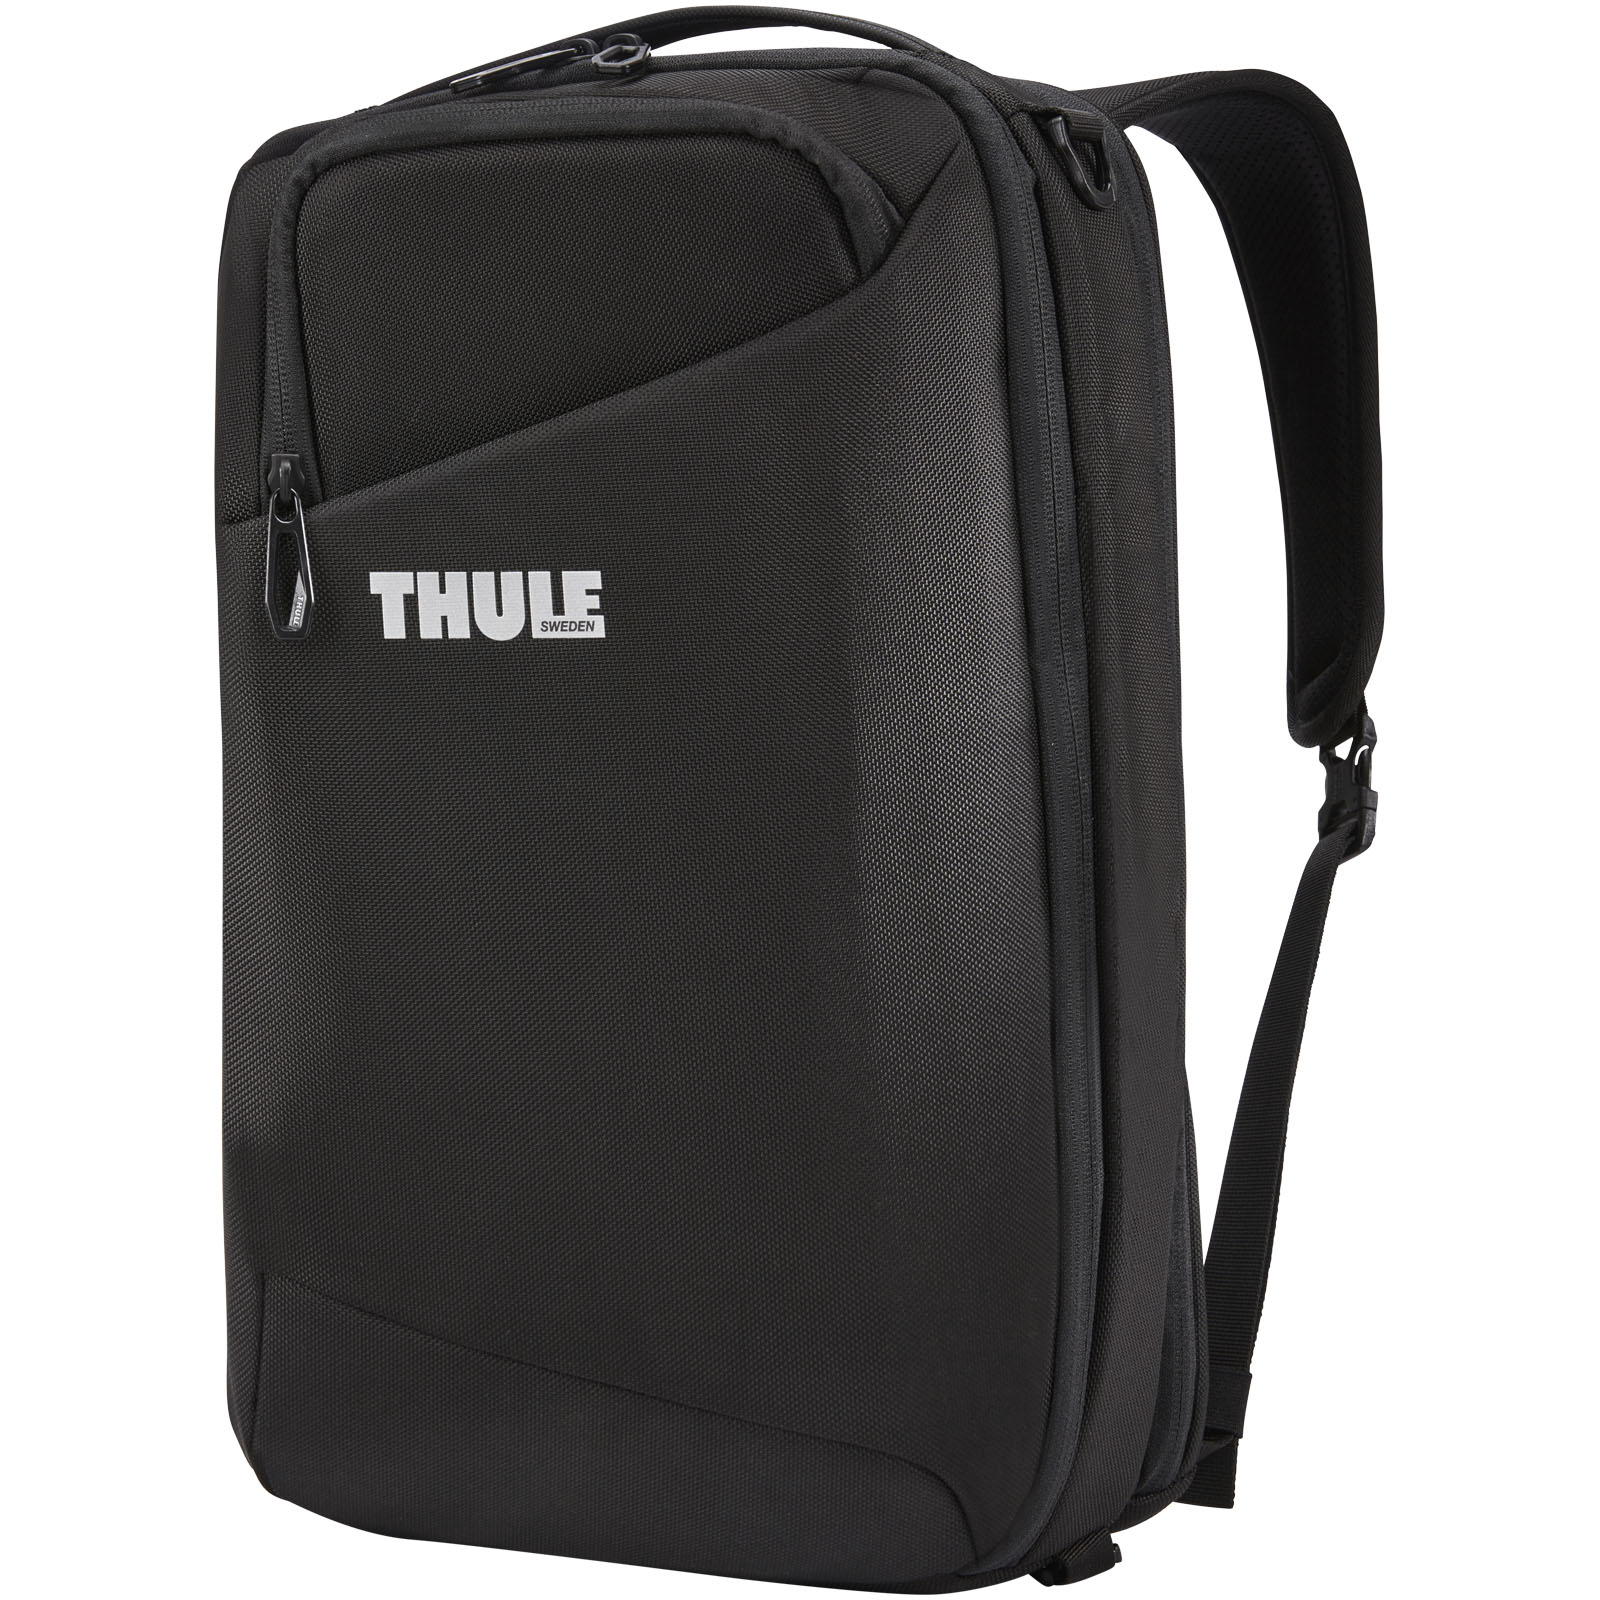 Advertising Backpacks - Thule Accent convertible backpack 17L